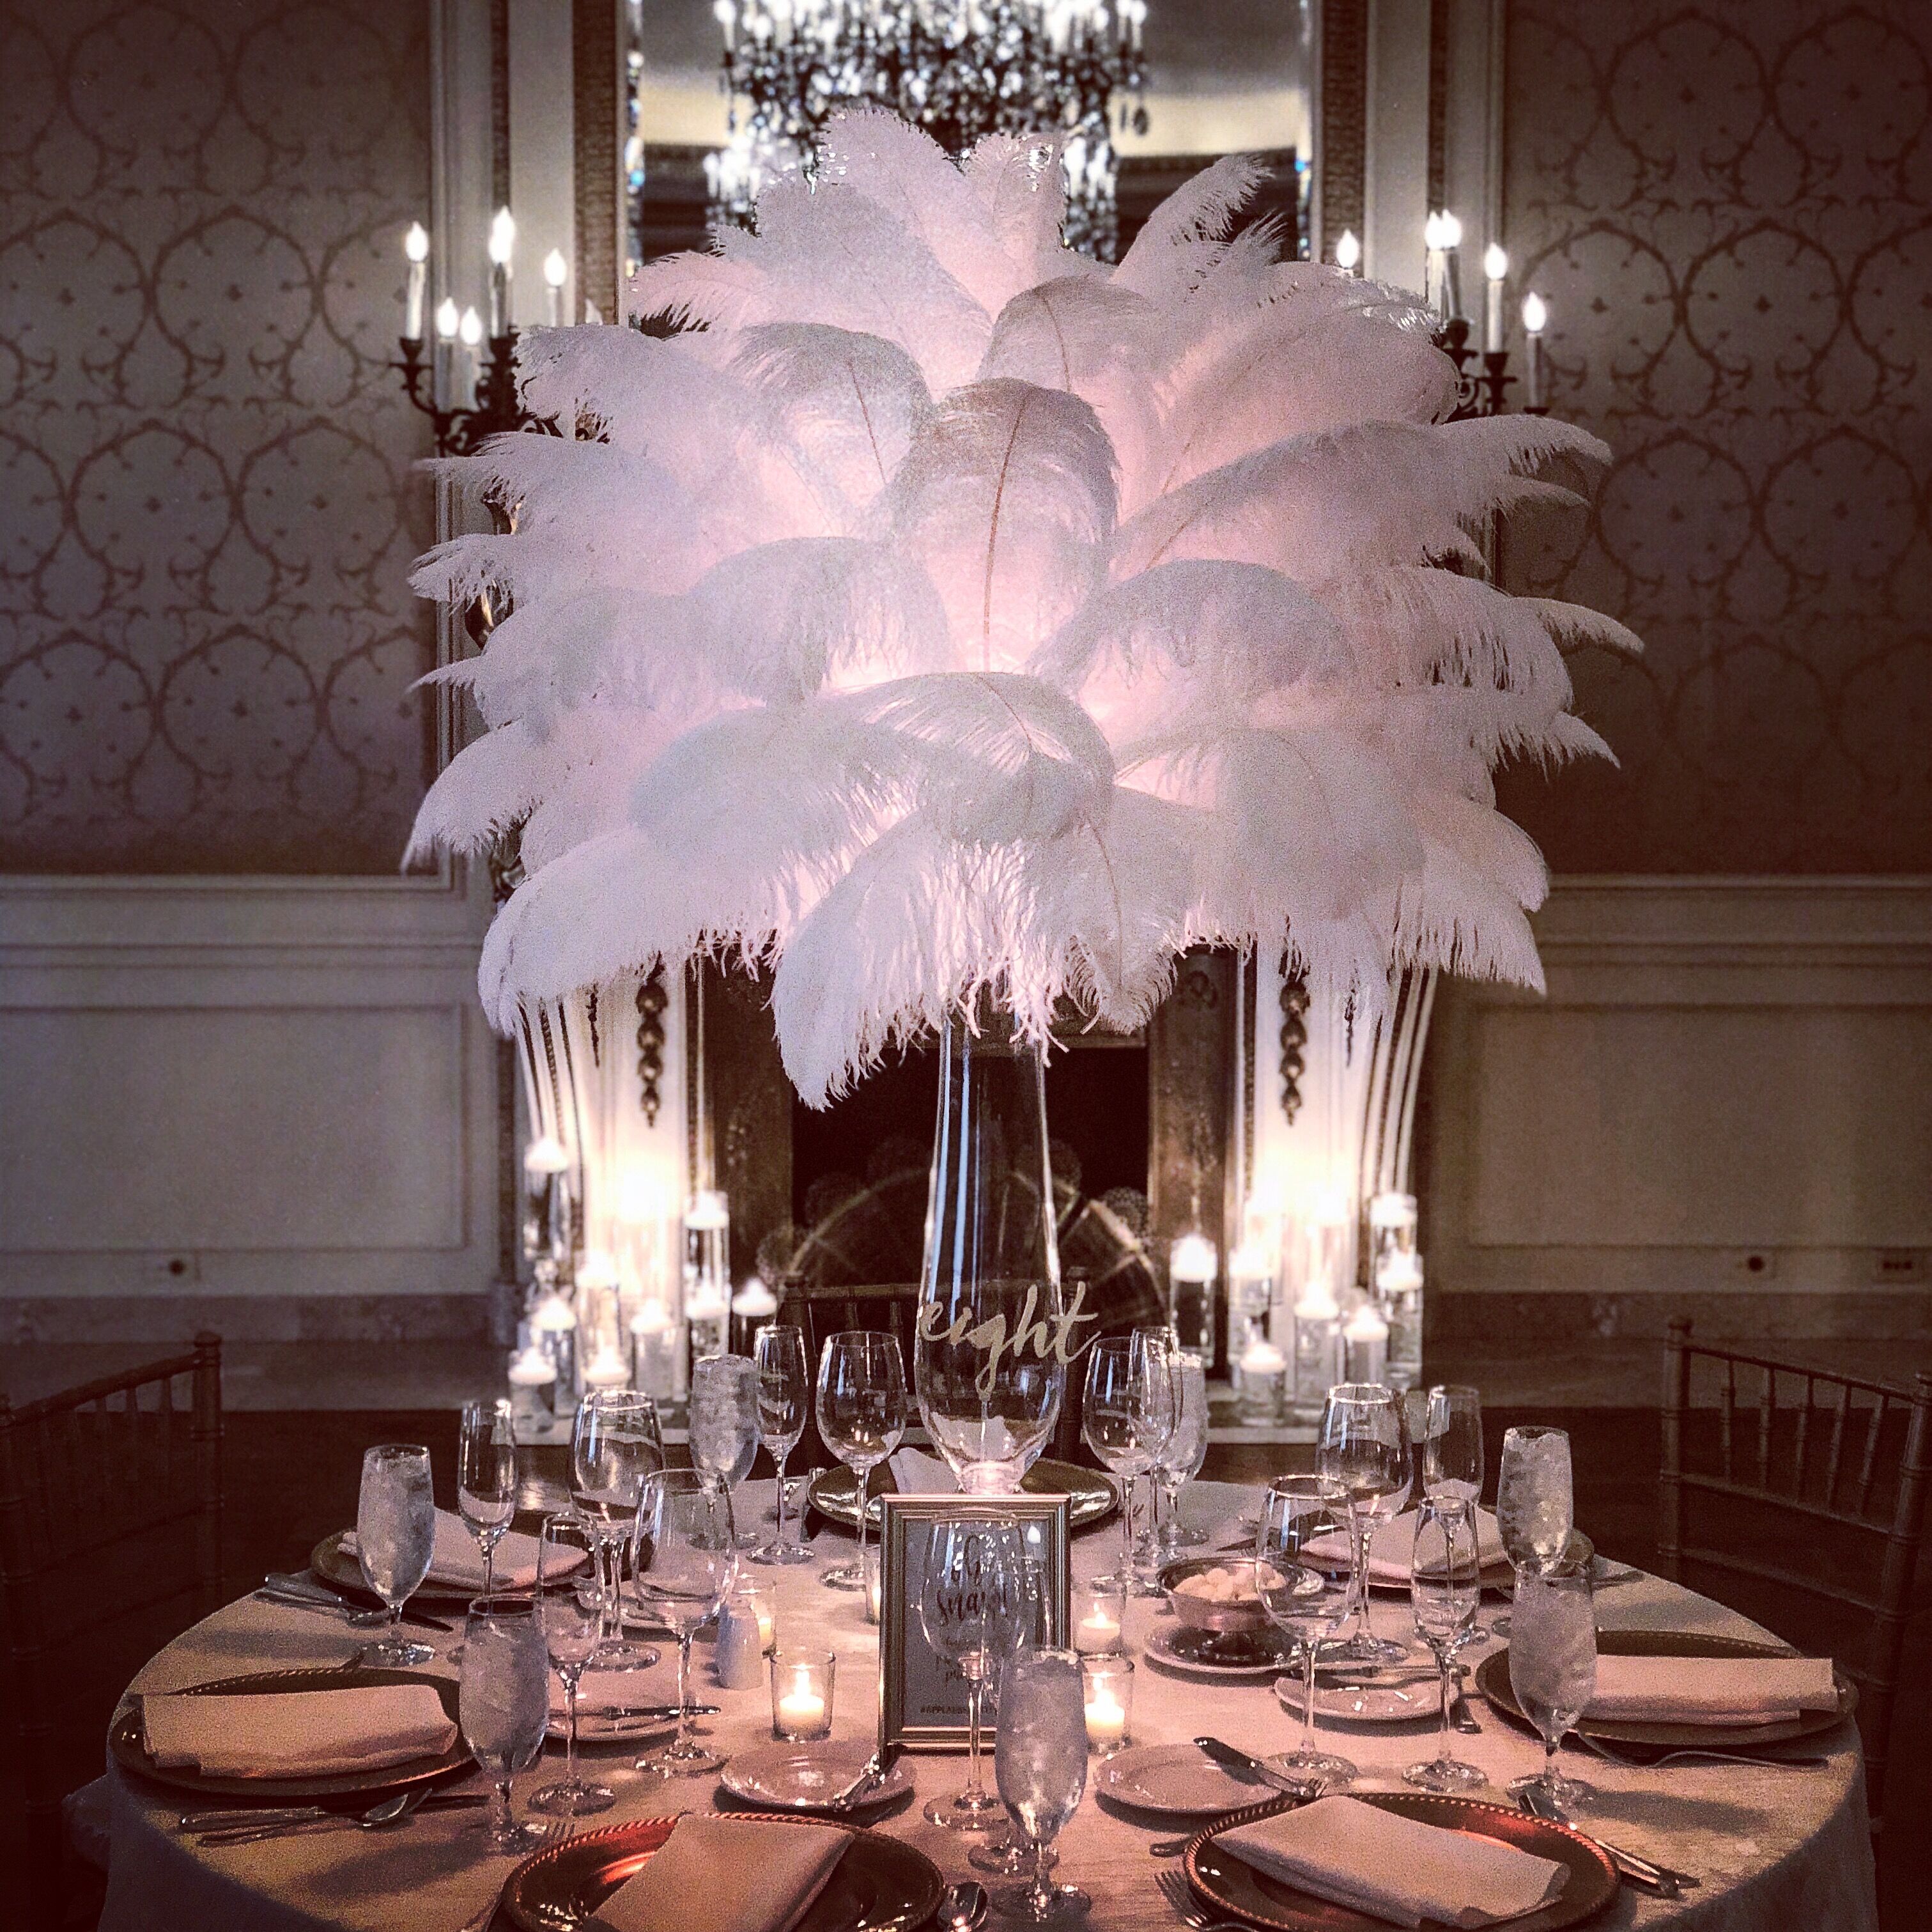 Rent-a-Centerpiece, An Ostrich Feather Company | Decor - The Knot